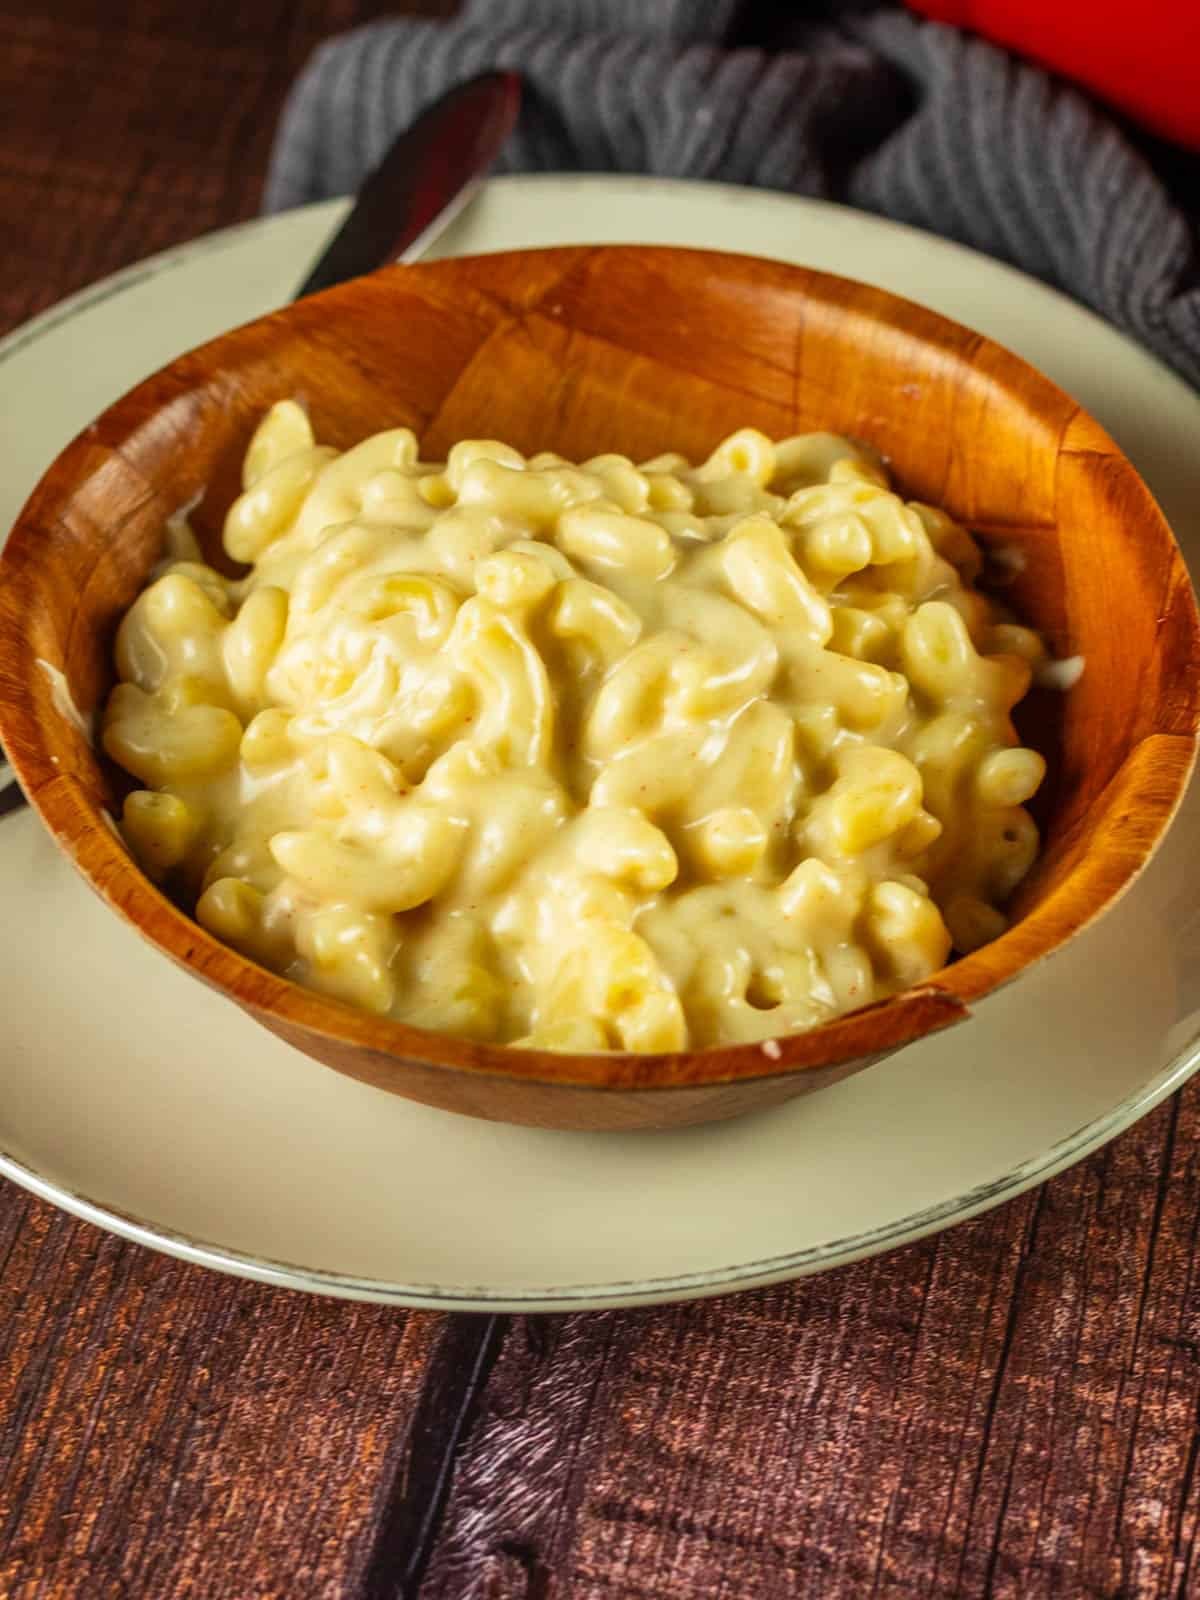 wooden bowl filled with white macaroni and cheese on a plate with a fork.